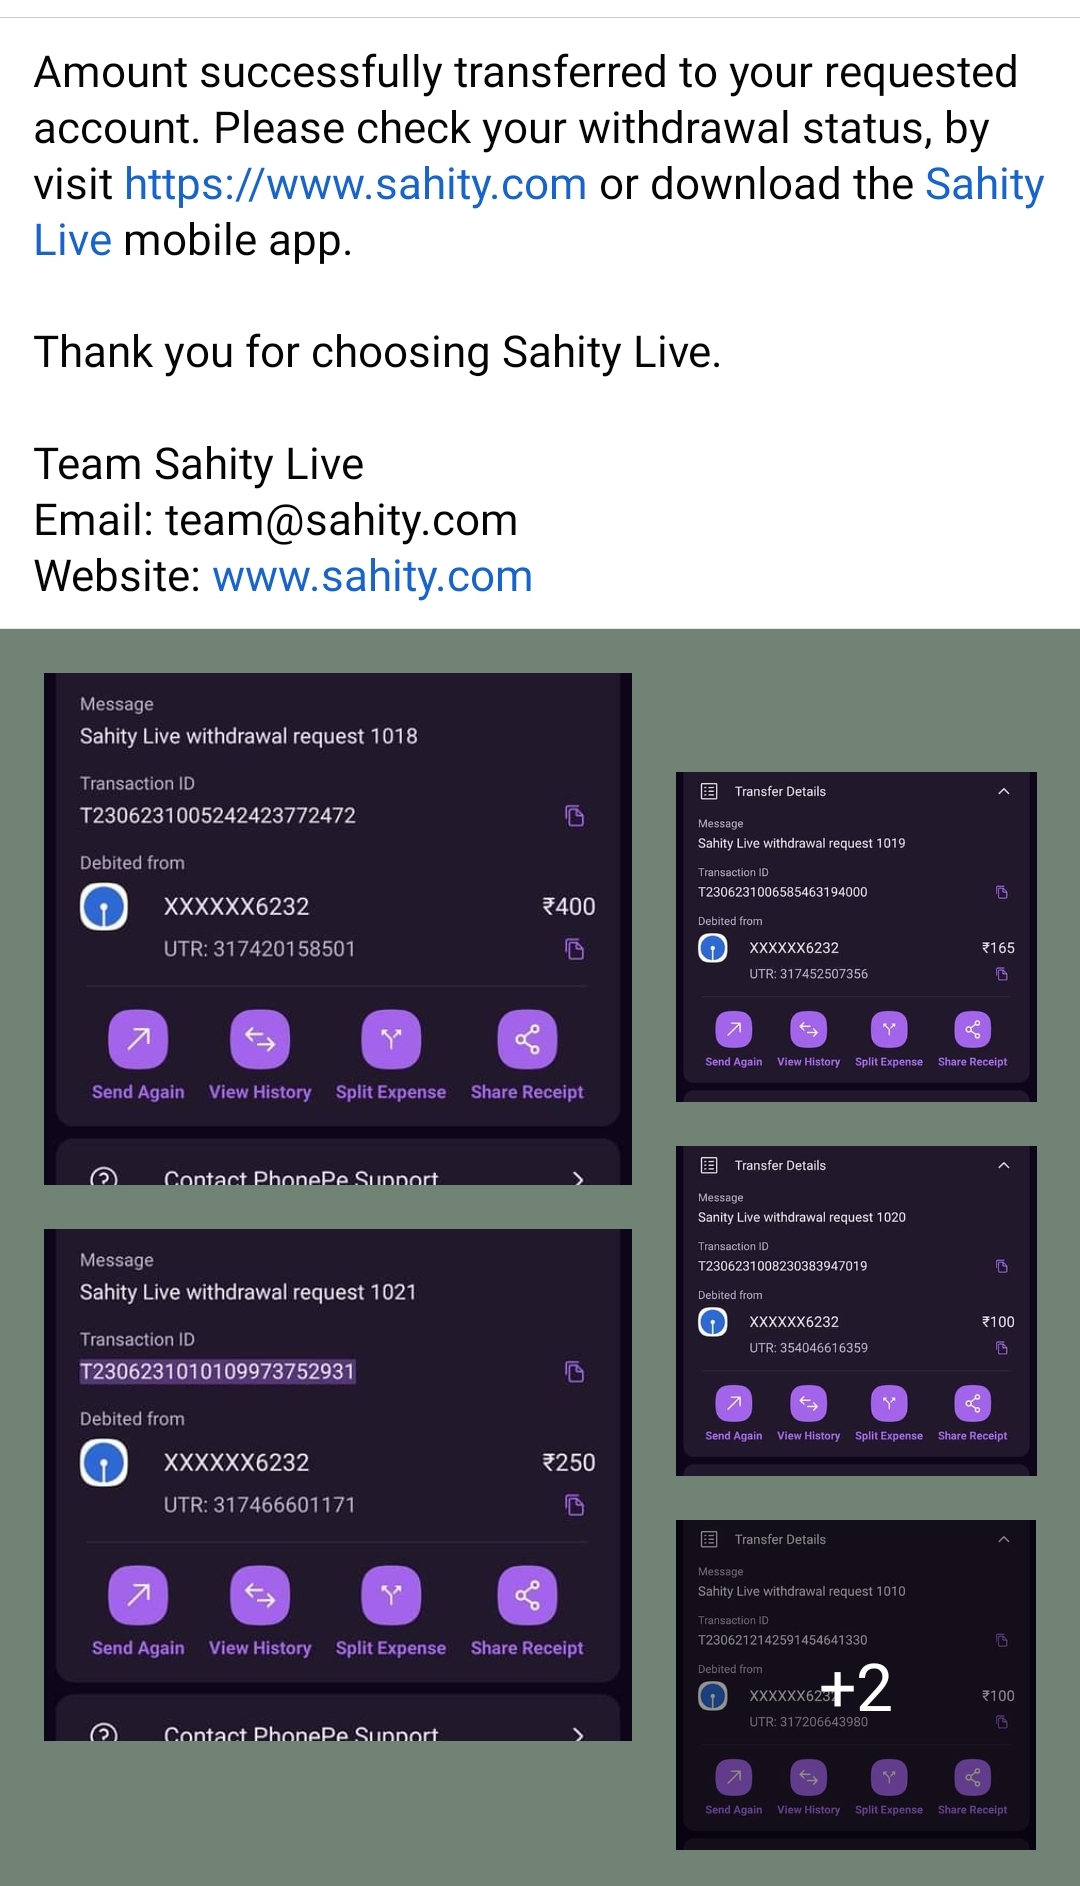 Sahity Live withdrawal request